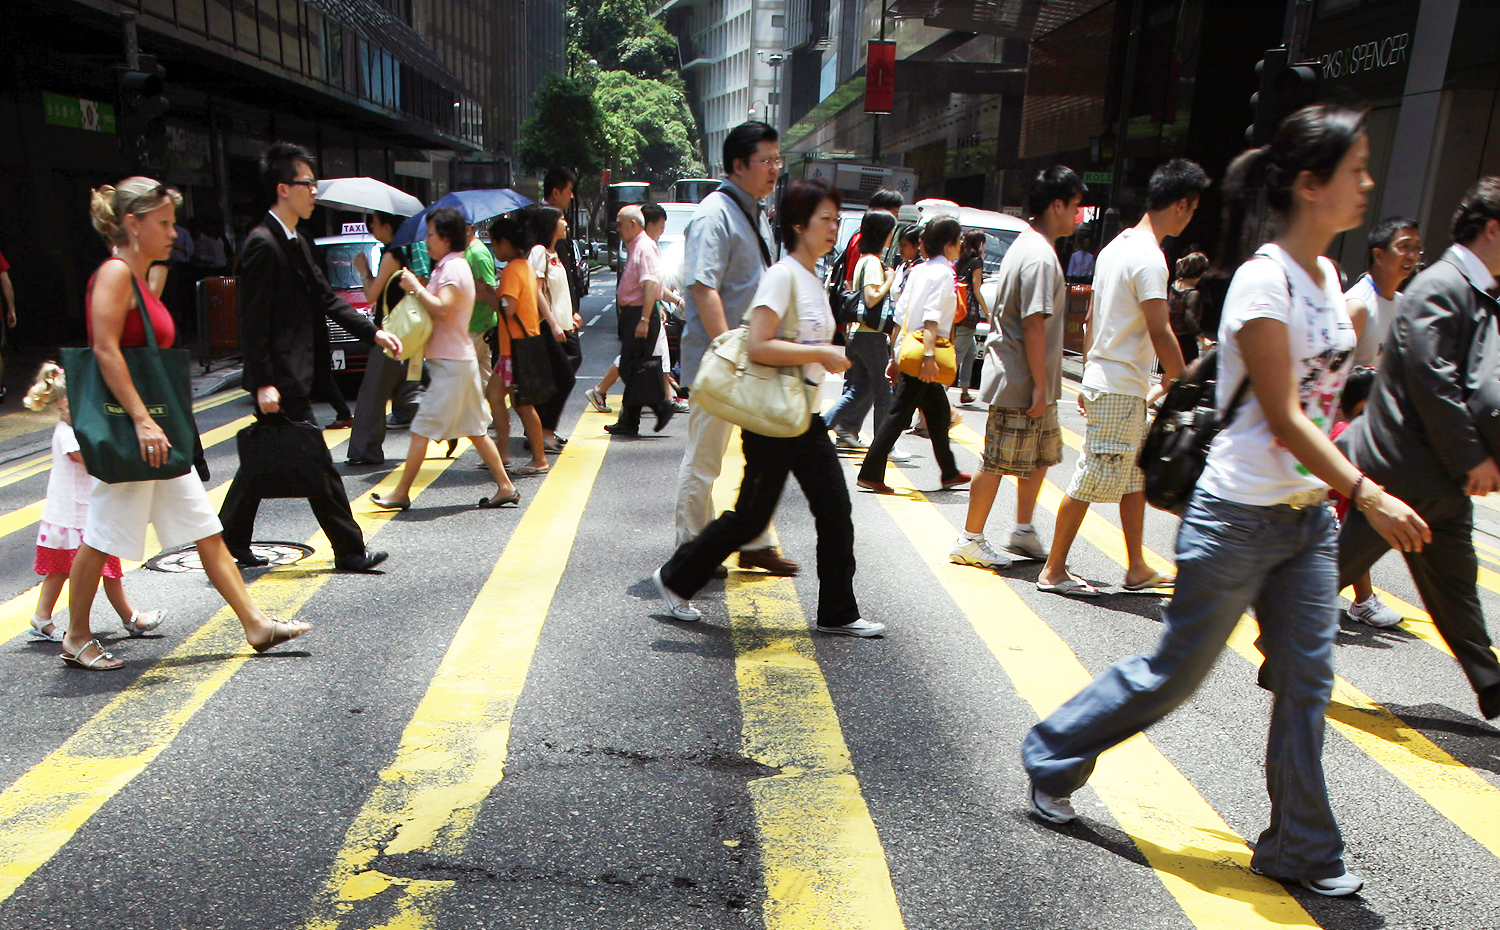 More than six in 10 employees in Hong Kong polled said they are unhappy at work and almost half of them said they intended to change jobs in the next 12 months, according to a survey carried out by a job-seeking website. Photo: AFP